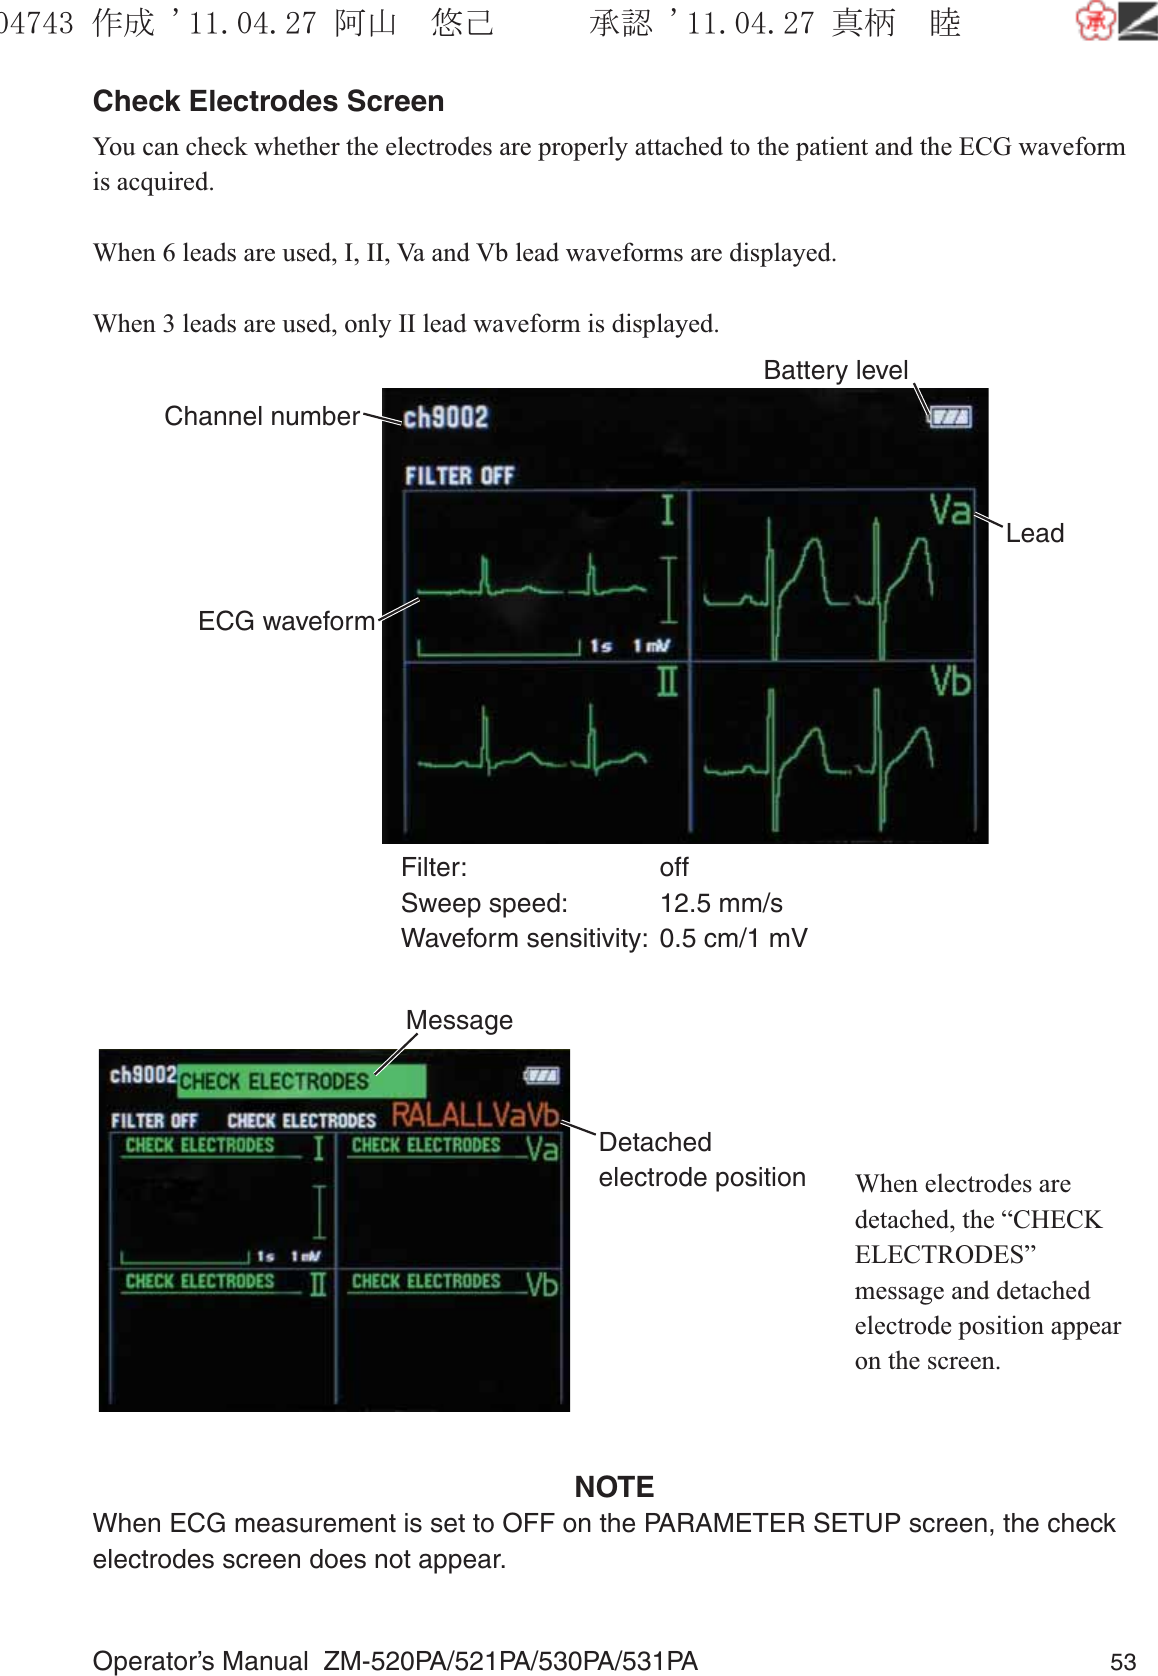 Operator’s Manual  ZM-520PA/521PA/530PA/531PA 53Check Electrodes ScreenYou can check whether the electrodes are properly attached to the patient and the ECG waveform is acquired.When 6 leads are used, I, II, Va and Vb lead waveforms are displayed.When 3 leads are used, only II lead waveform is displayed.Filter: offSweep speed:  12.5 mm/sWaveform sensitivity:  0.5 cm/1 mVECG waveformBattery levelLeadChannel numberDetached electrode positionMessage     When electrodes are detached, the “CHECK ELECTRODES” message and detached electrode position appear on the screen.NOTEWhen ECG measurement is set to OFF on the PARAMETER SETUP screen, the check electrodes screen does not appear.૞ᚑ㒙ጊޓᖘᏆ ᛚ⹺⌀ᨩޓ⌬